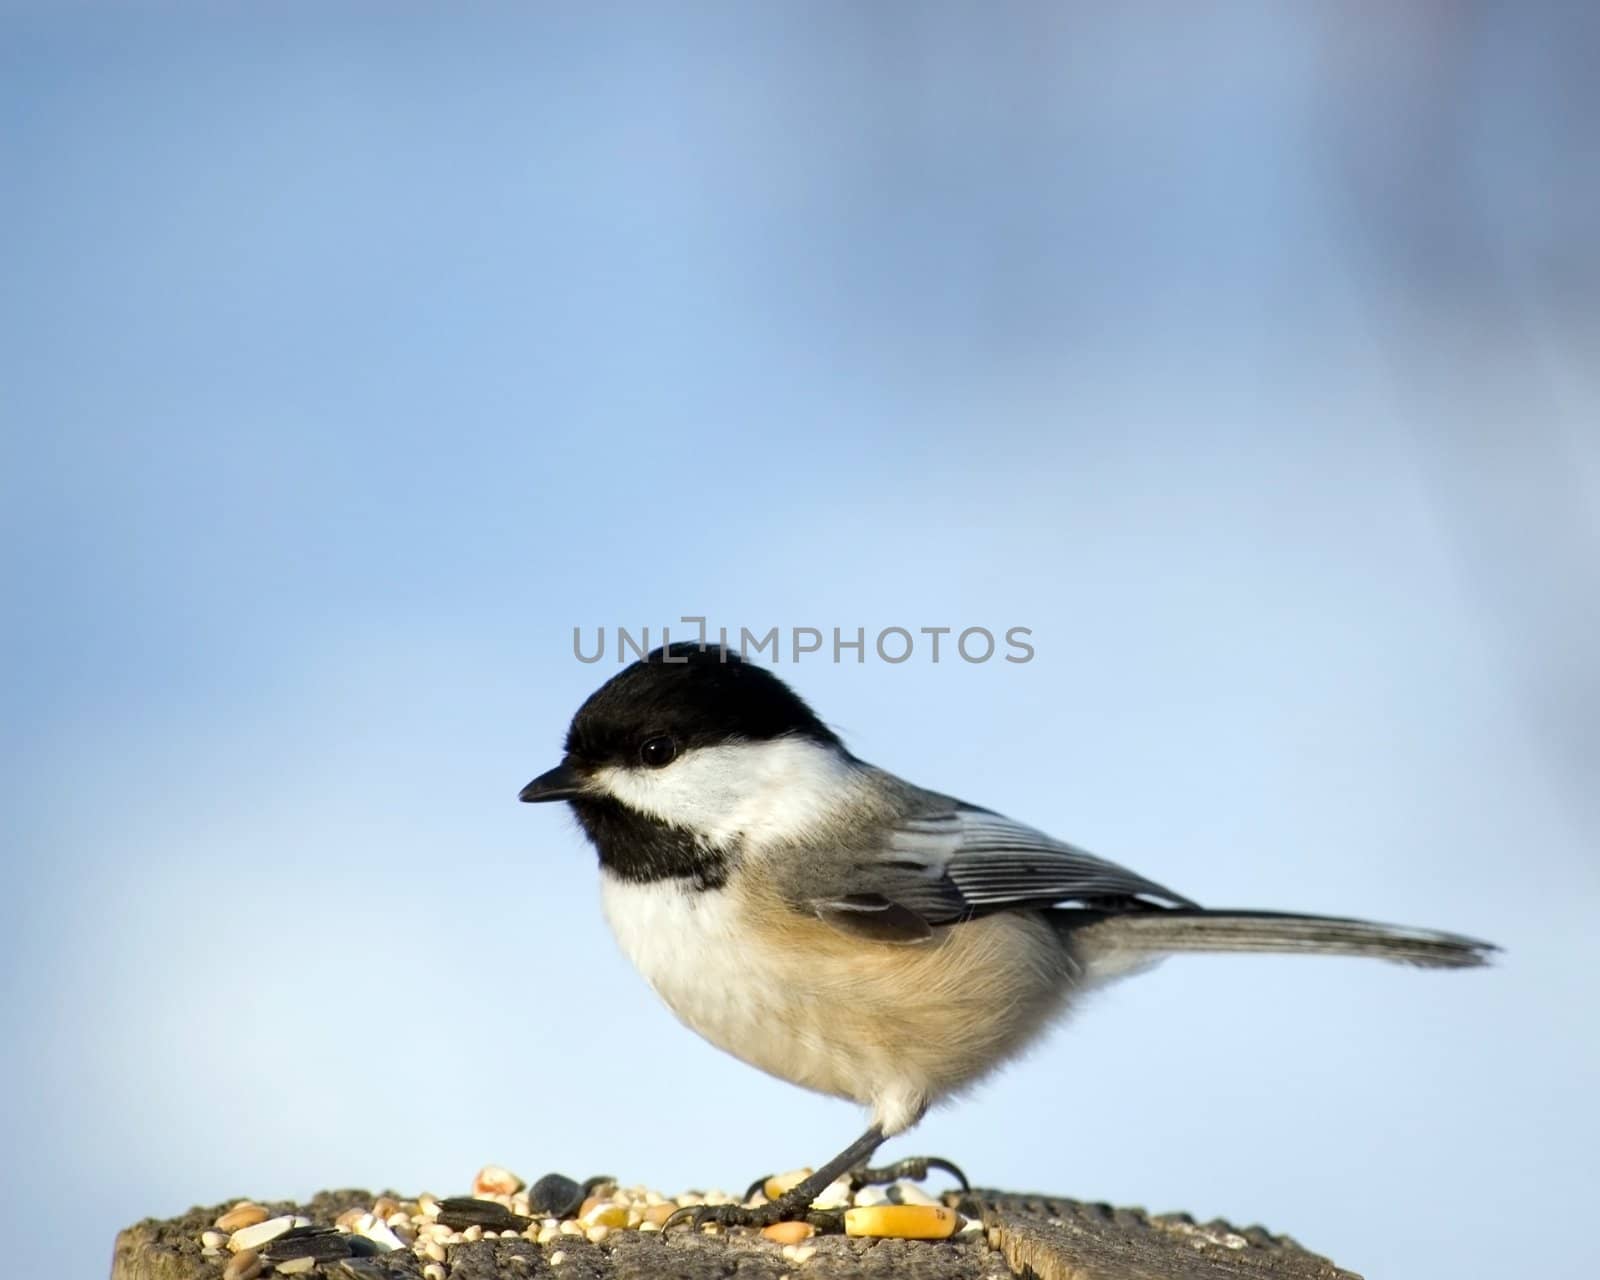 A black-capped chickadee perched on a wooden post.